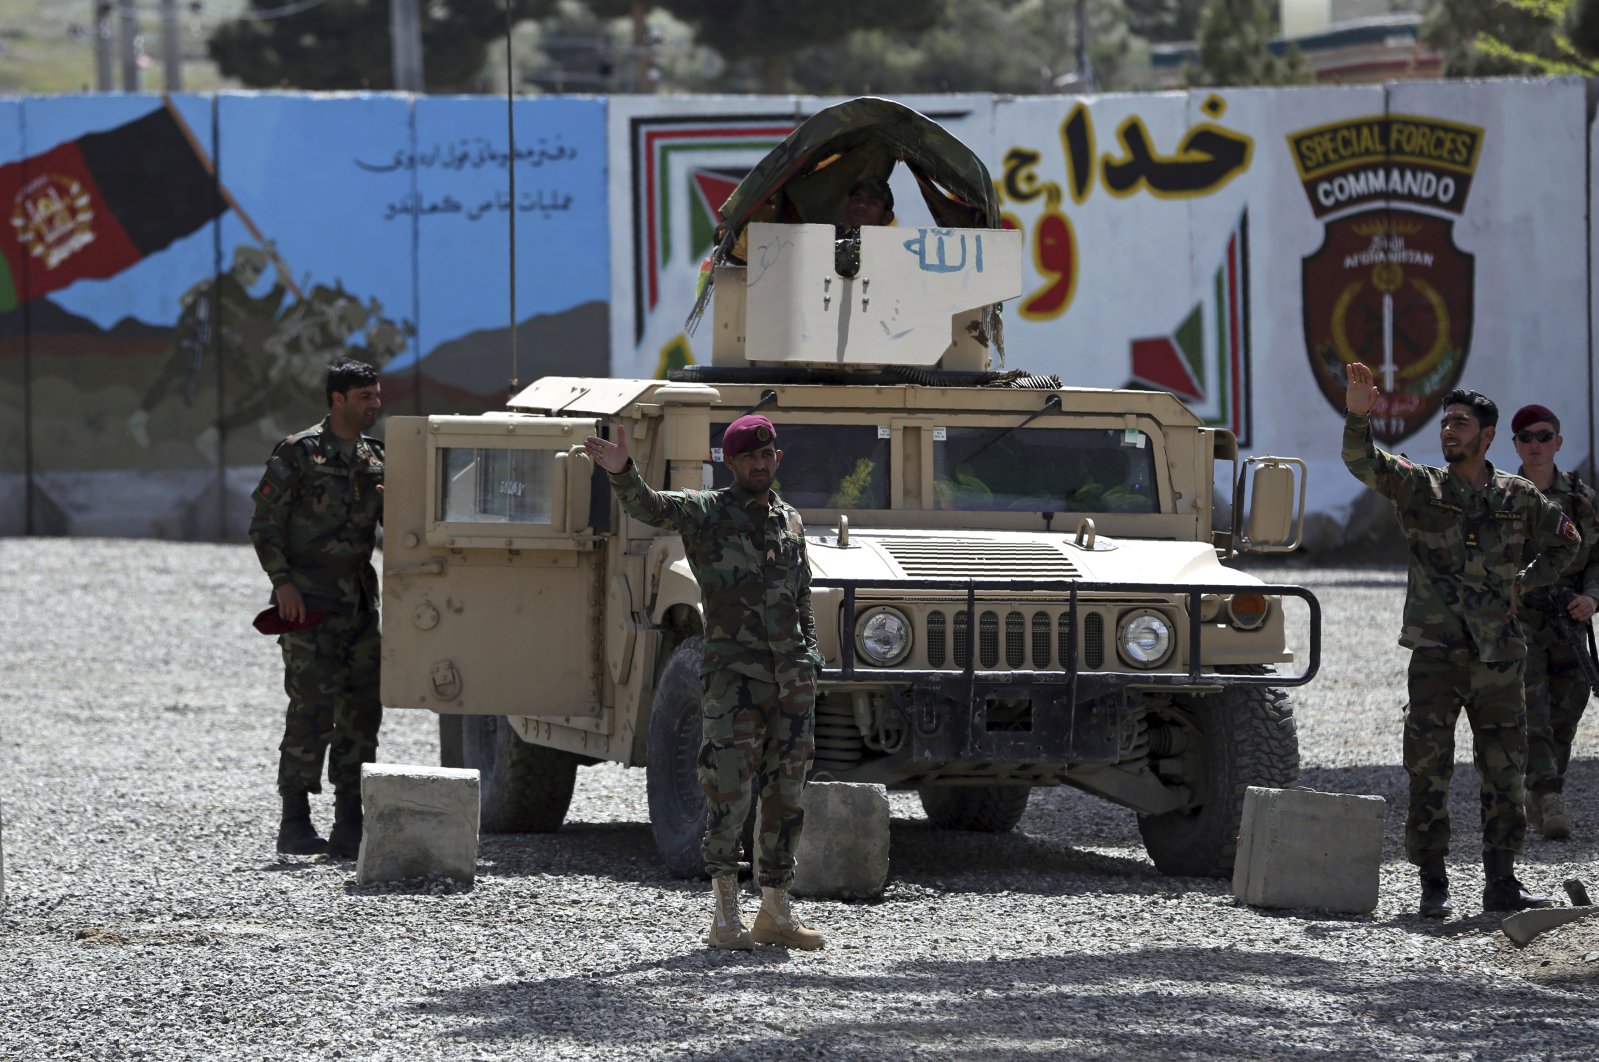 Afghan special forces stand guard near the site of a suicide bomber attack on the outskirts of Kabul, Afghanistan, Wednesday, April 29, 2020. (AP Photo)